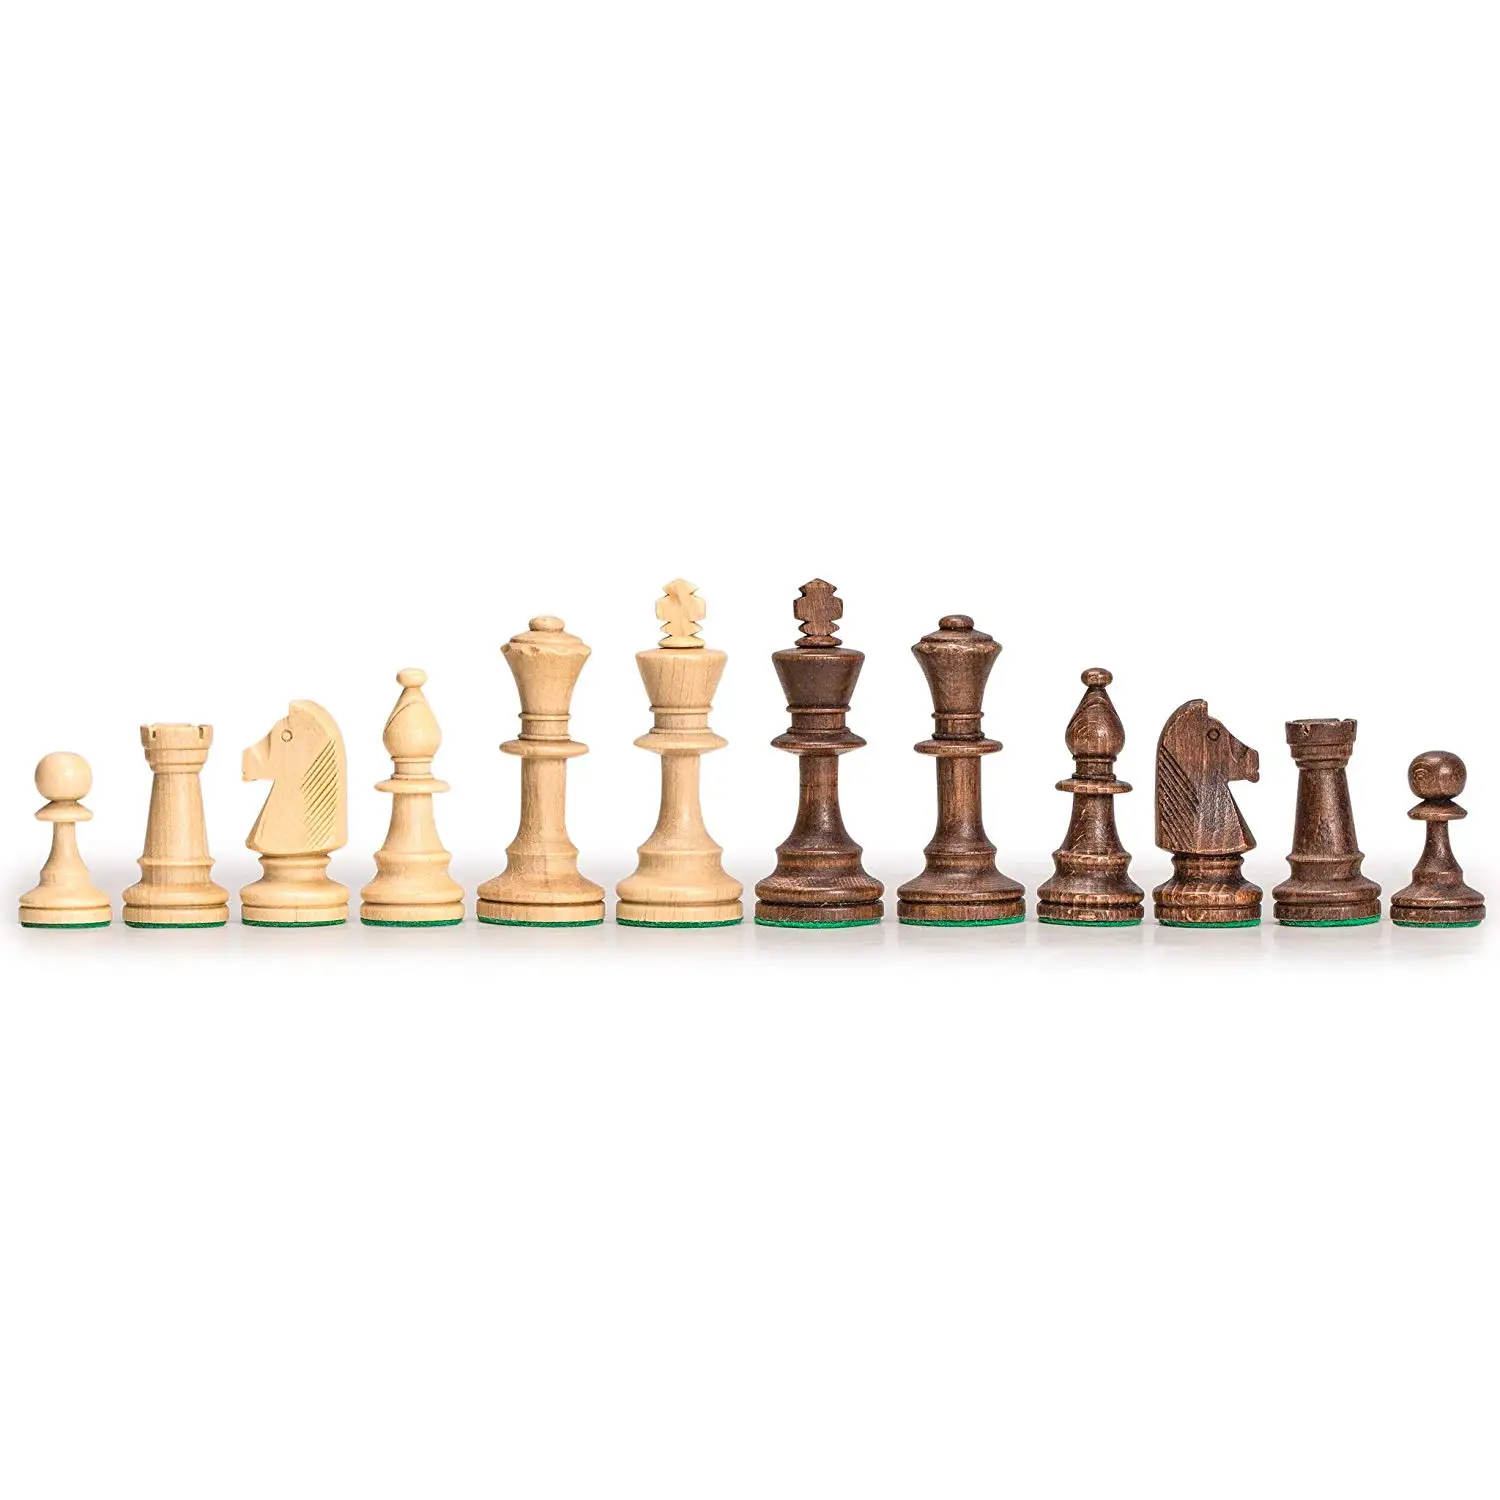 6 cm King New Wooden Chess Set 32 Pieces Pieces Only King 6 cm 